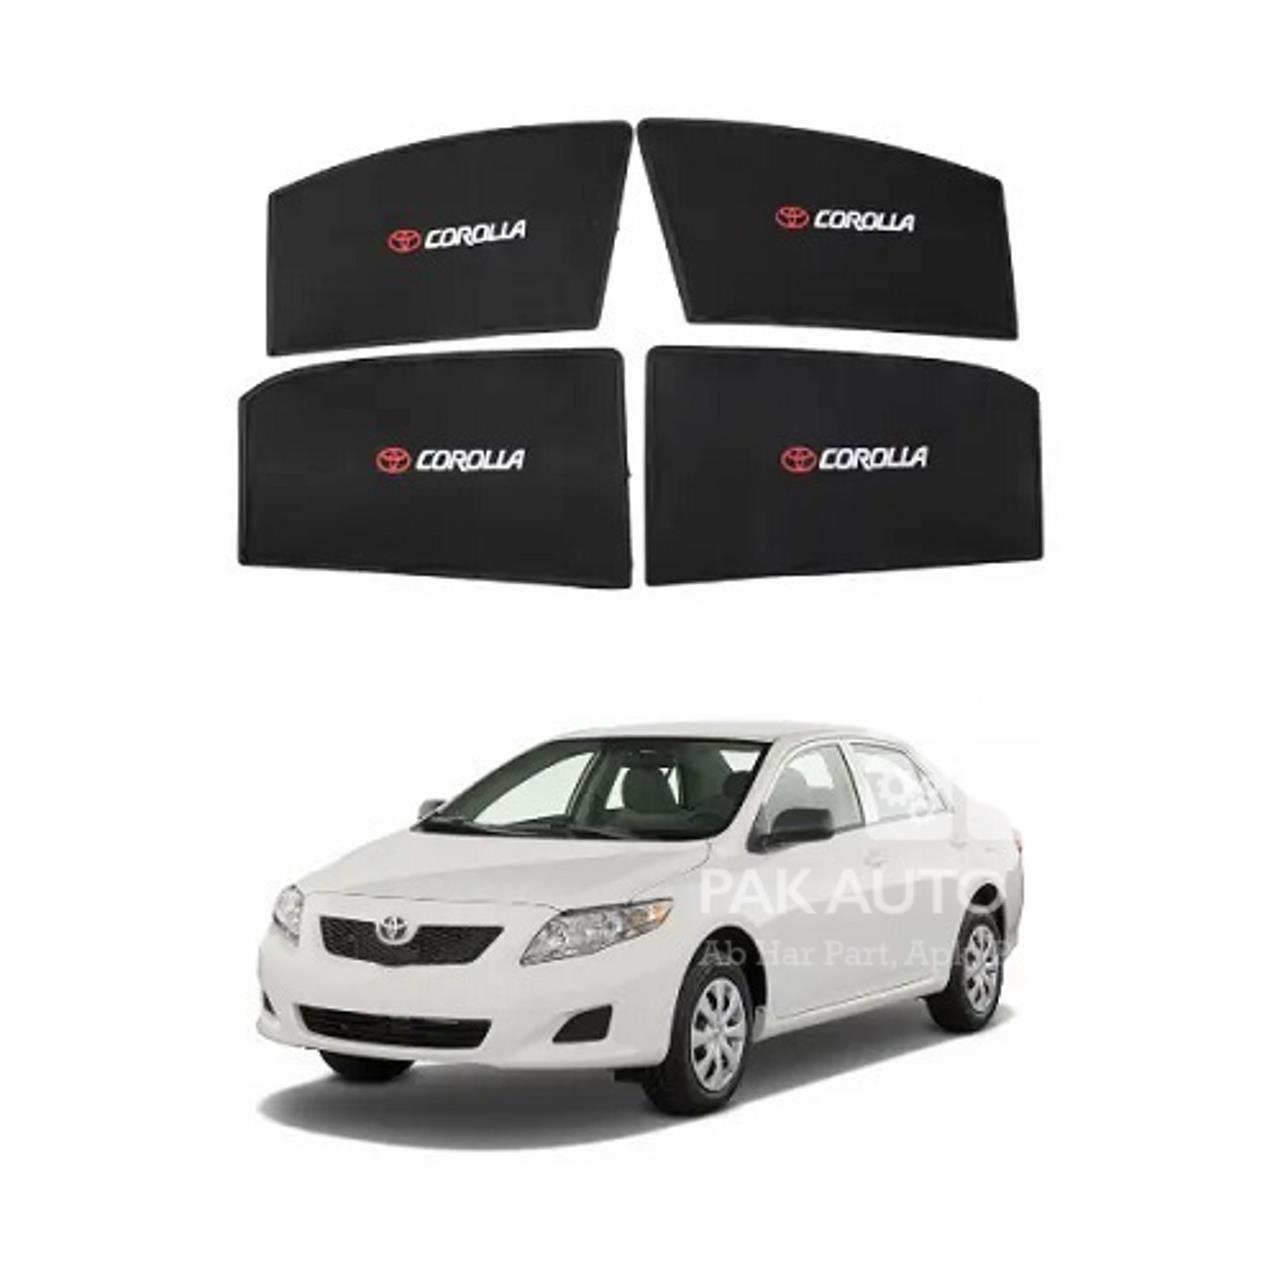 Picture of Toyota Corolla 2009-2012 Sun Shades Car Windows Curtains 4 pieces With Corolla Logo | Fold-able | Jet Black